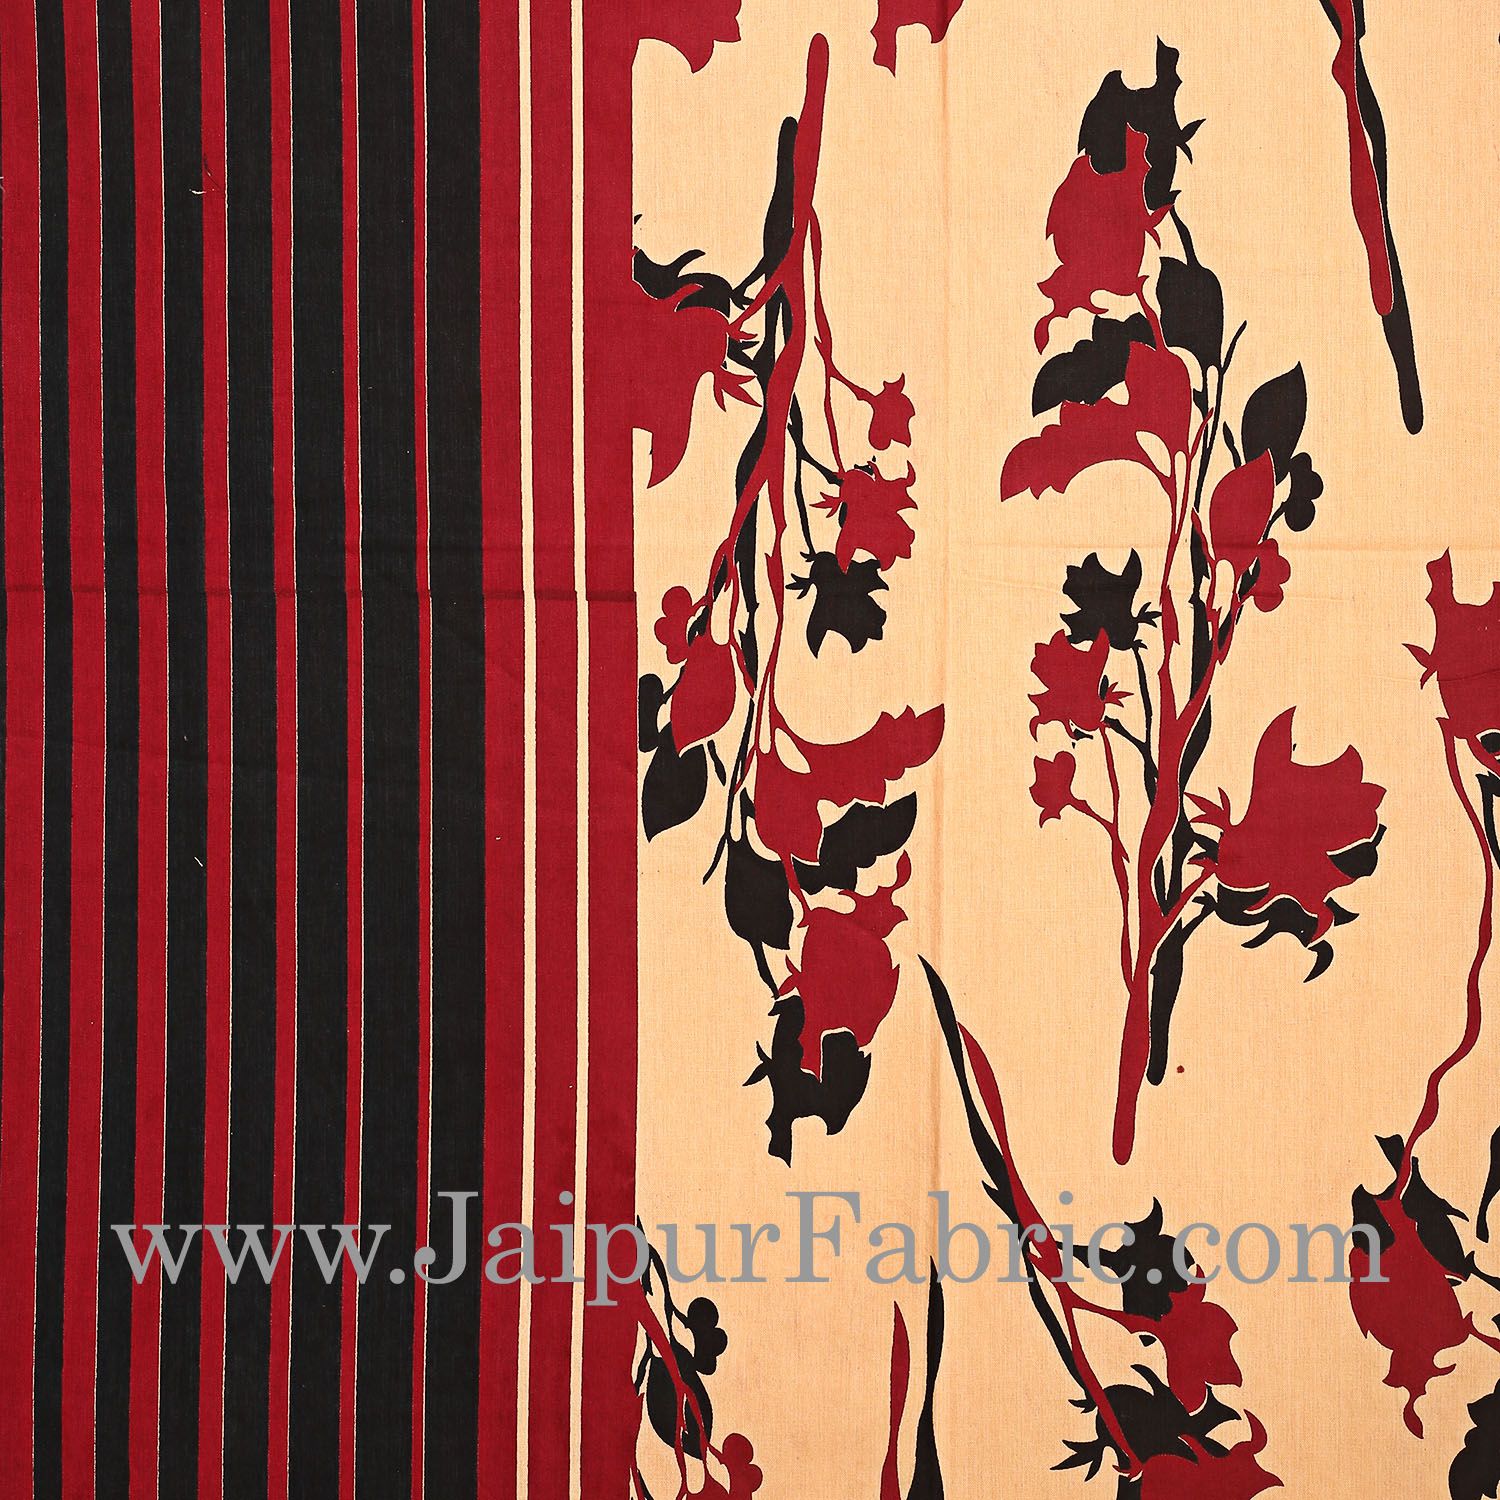 Maroon And Black Lining Border Cream Base Floral Pattern In   Bagru Print Cotton Double Bedsheet